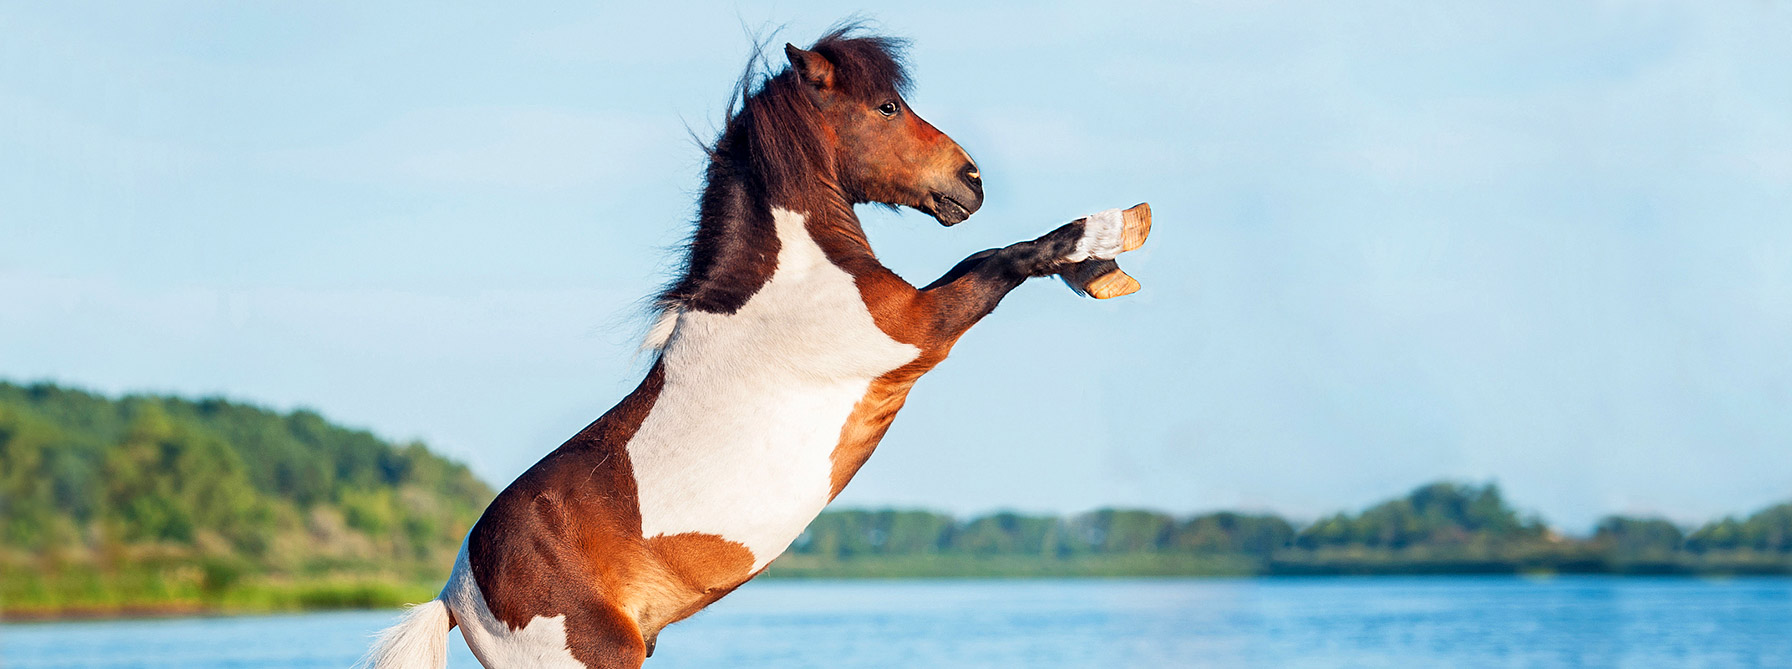 Optimise content to avoid being a one trick pony